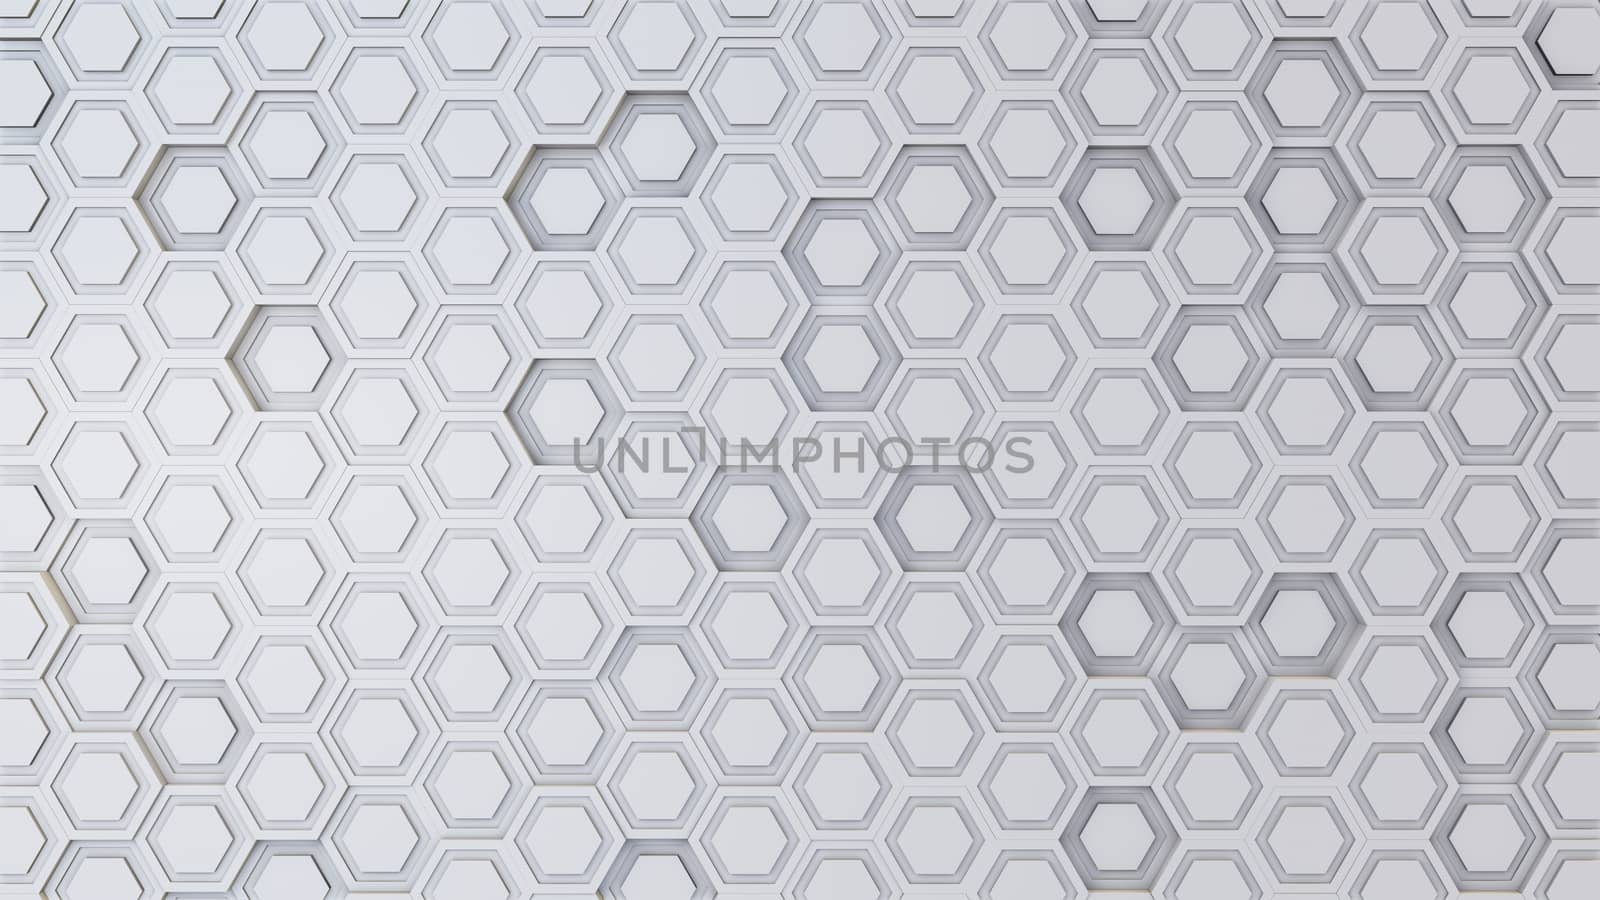 Abstract 3D illustration of hexagons background. Random displacement. Good background